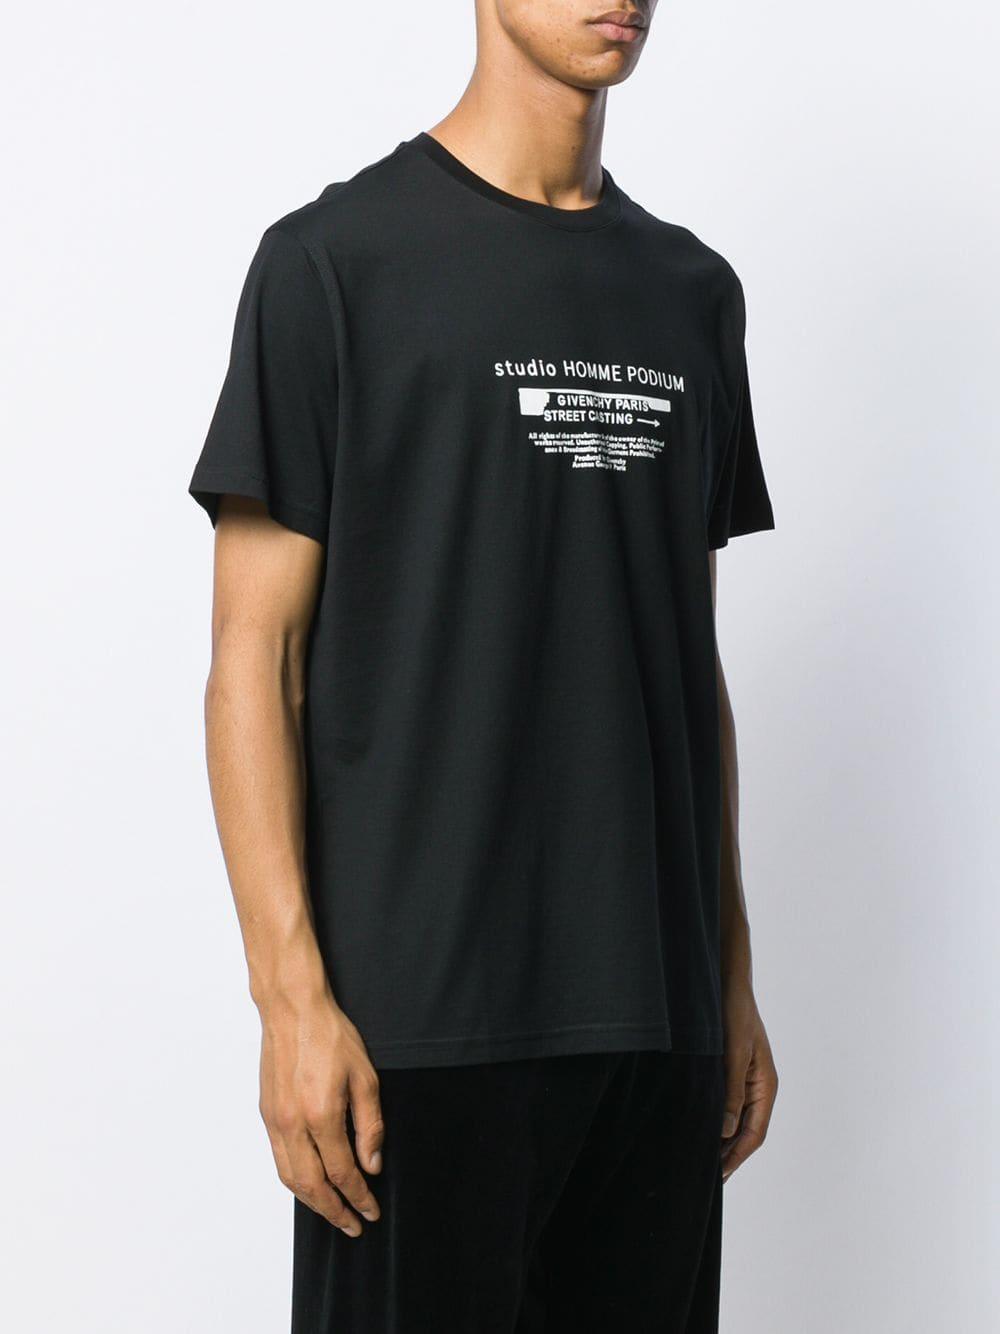 Givenchy Studio Homme Podium Printed T-shirt in Black for Men | Lyst